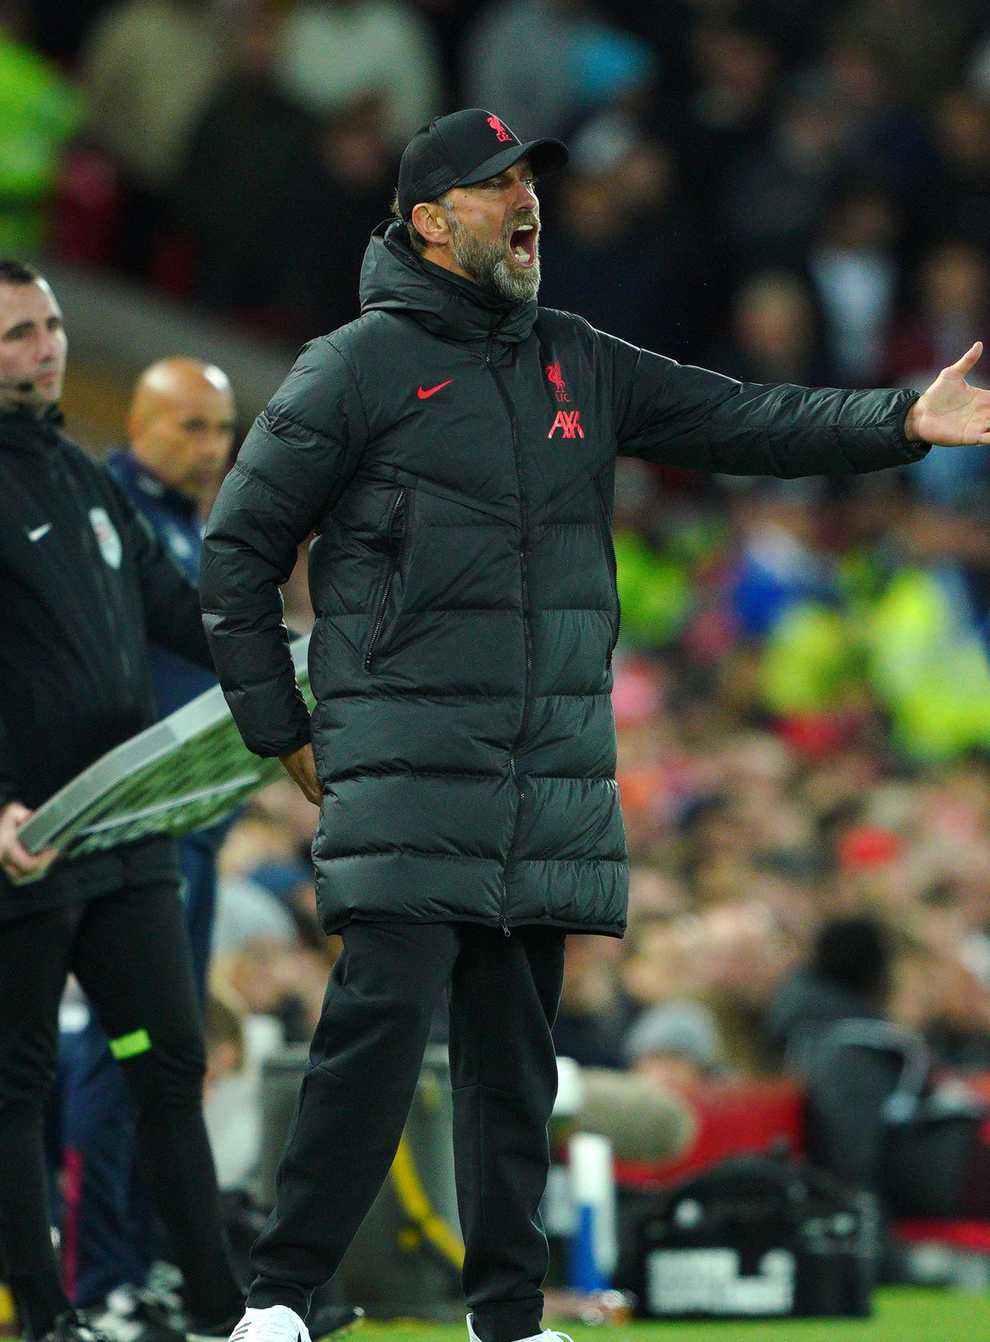 Jurgen Klopp was back on the touchline after receiving an FA charge (Peter Byrne/PA)